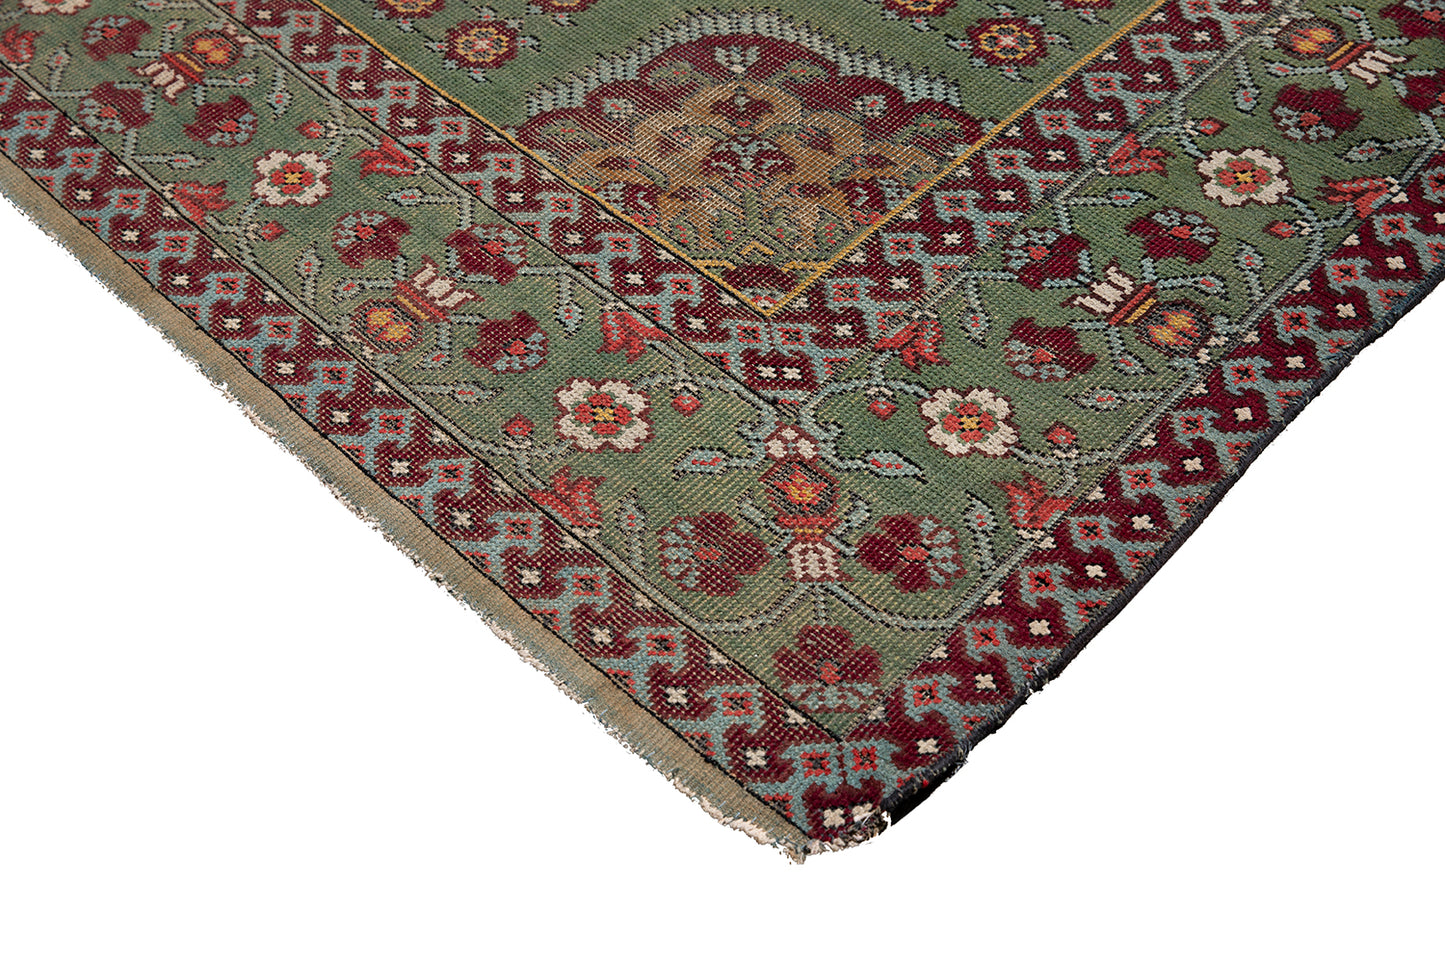 10'x13' Green and Red Geometric Antique English Hand-knotted Rug